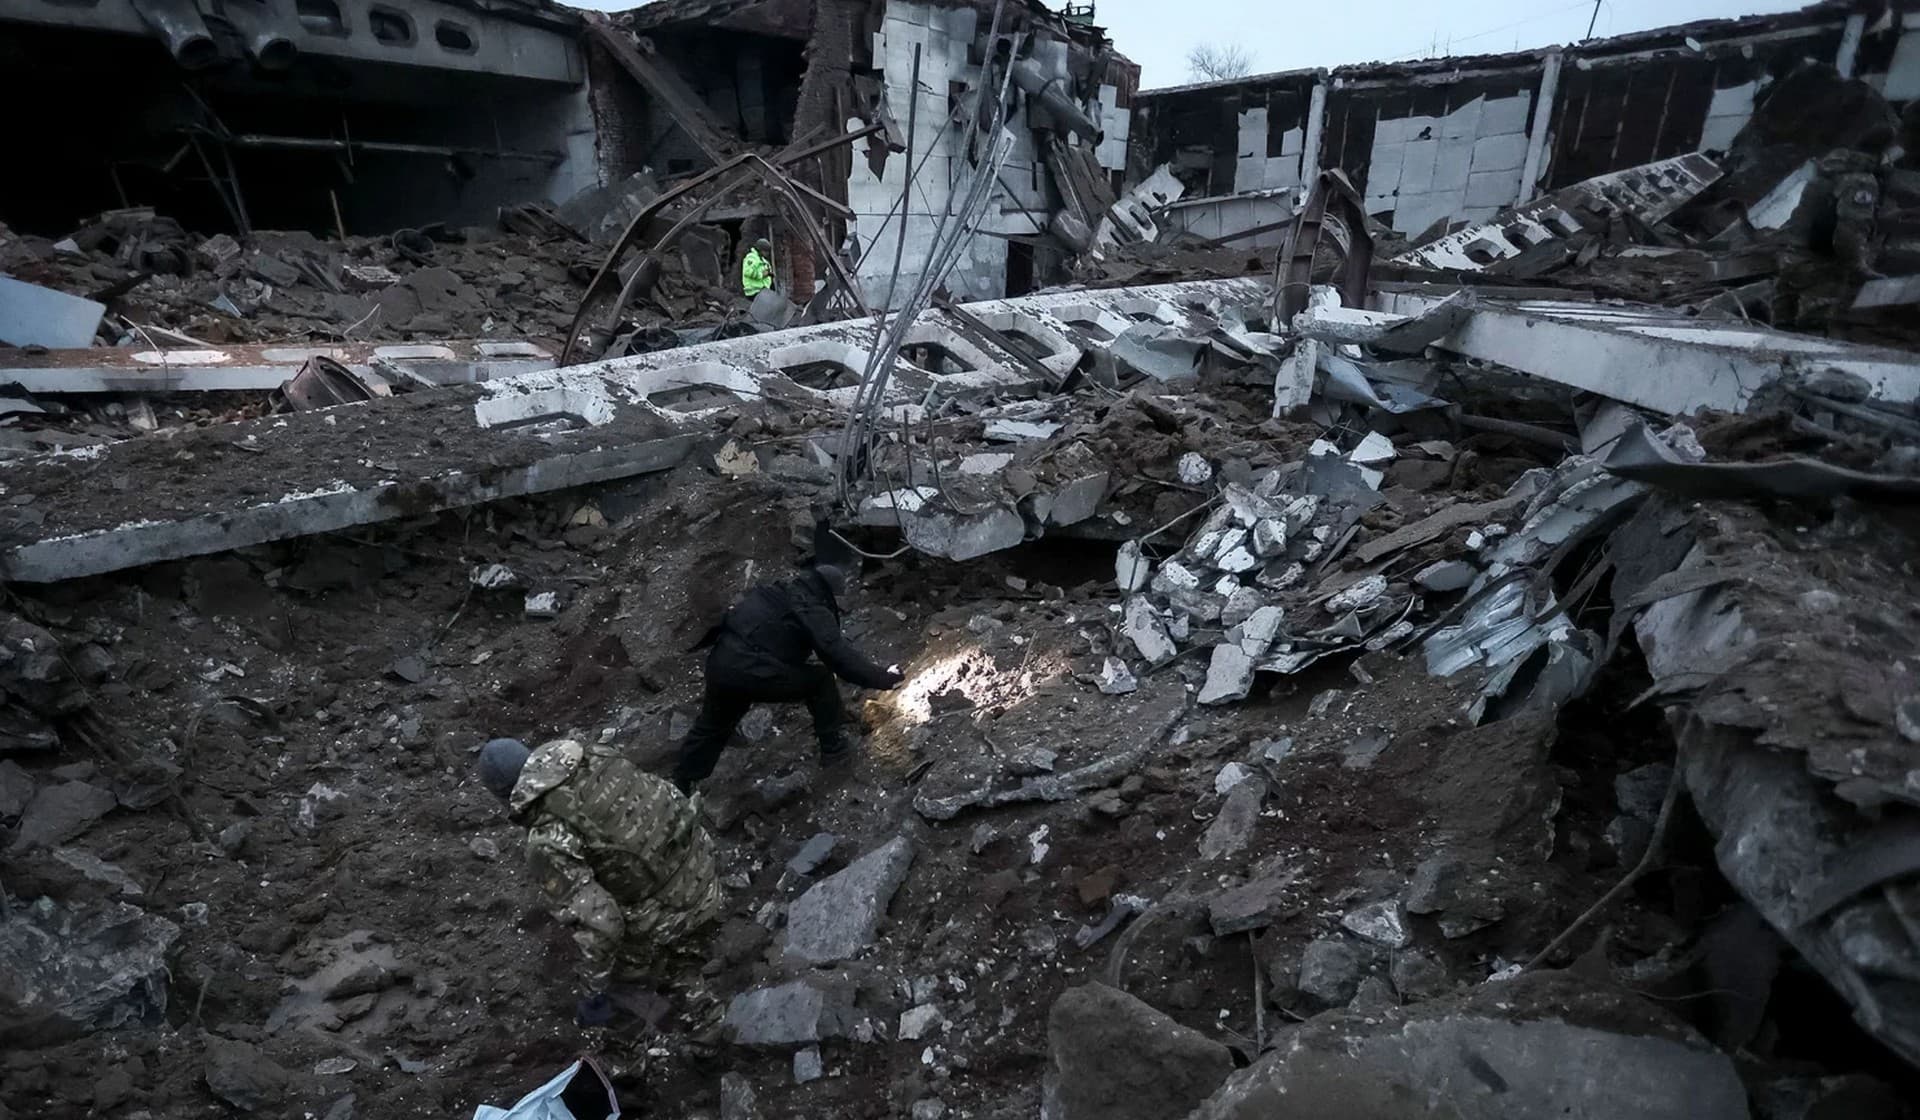 Police and investigators inspect a crater at a site of an industrial area destroyed by a Russian missile strike in Kharkiv